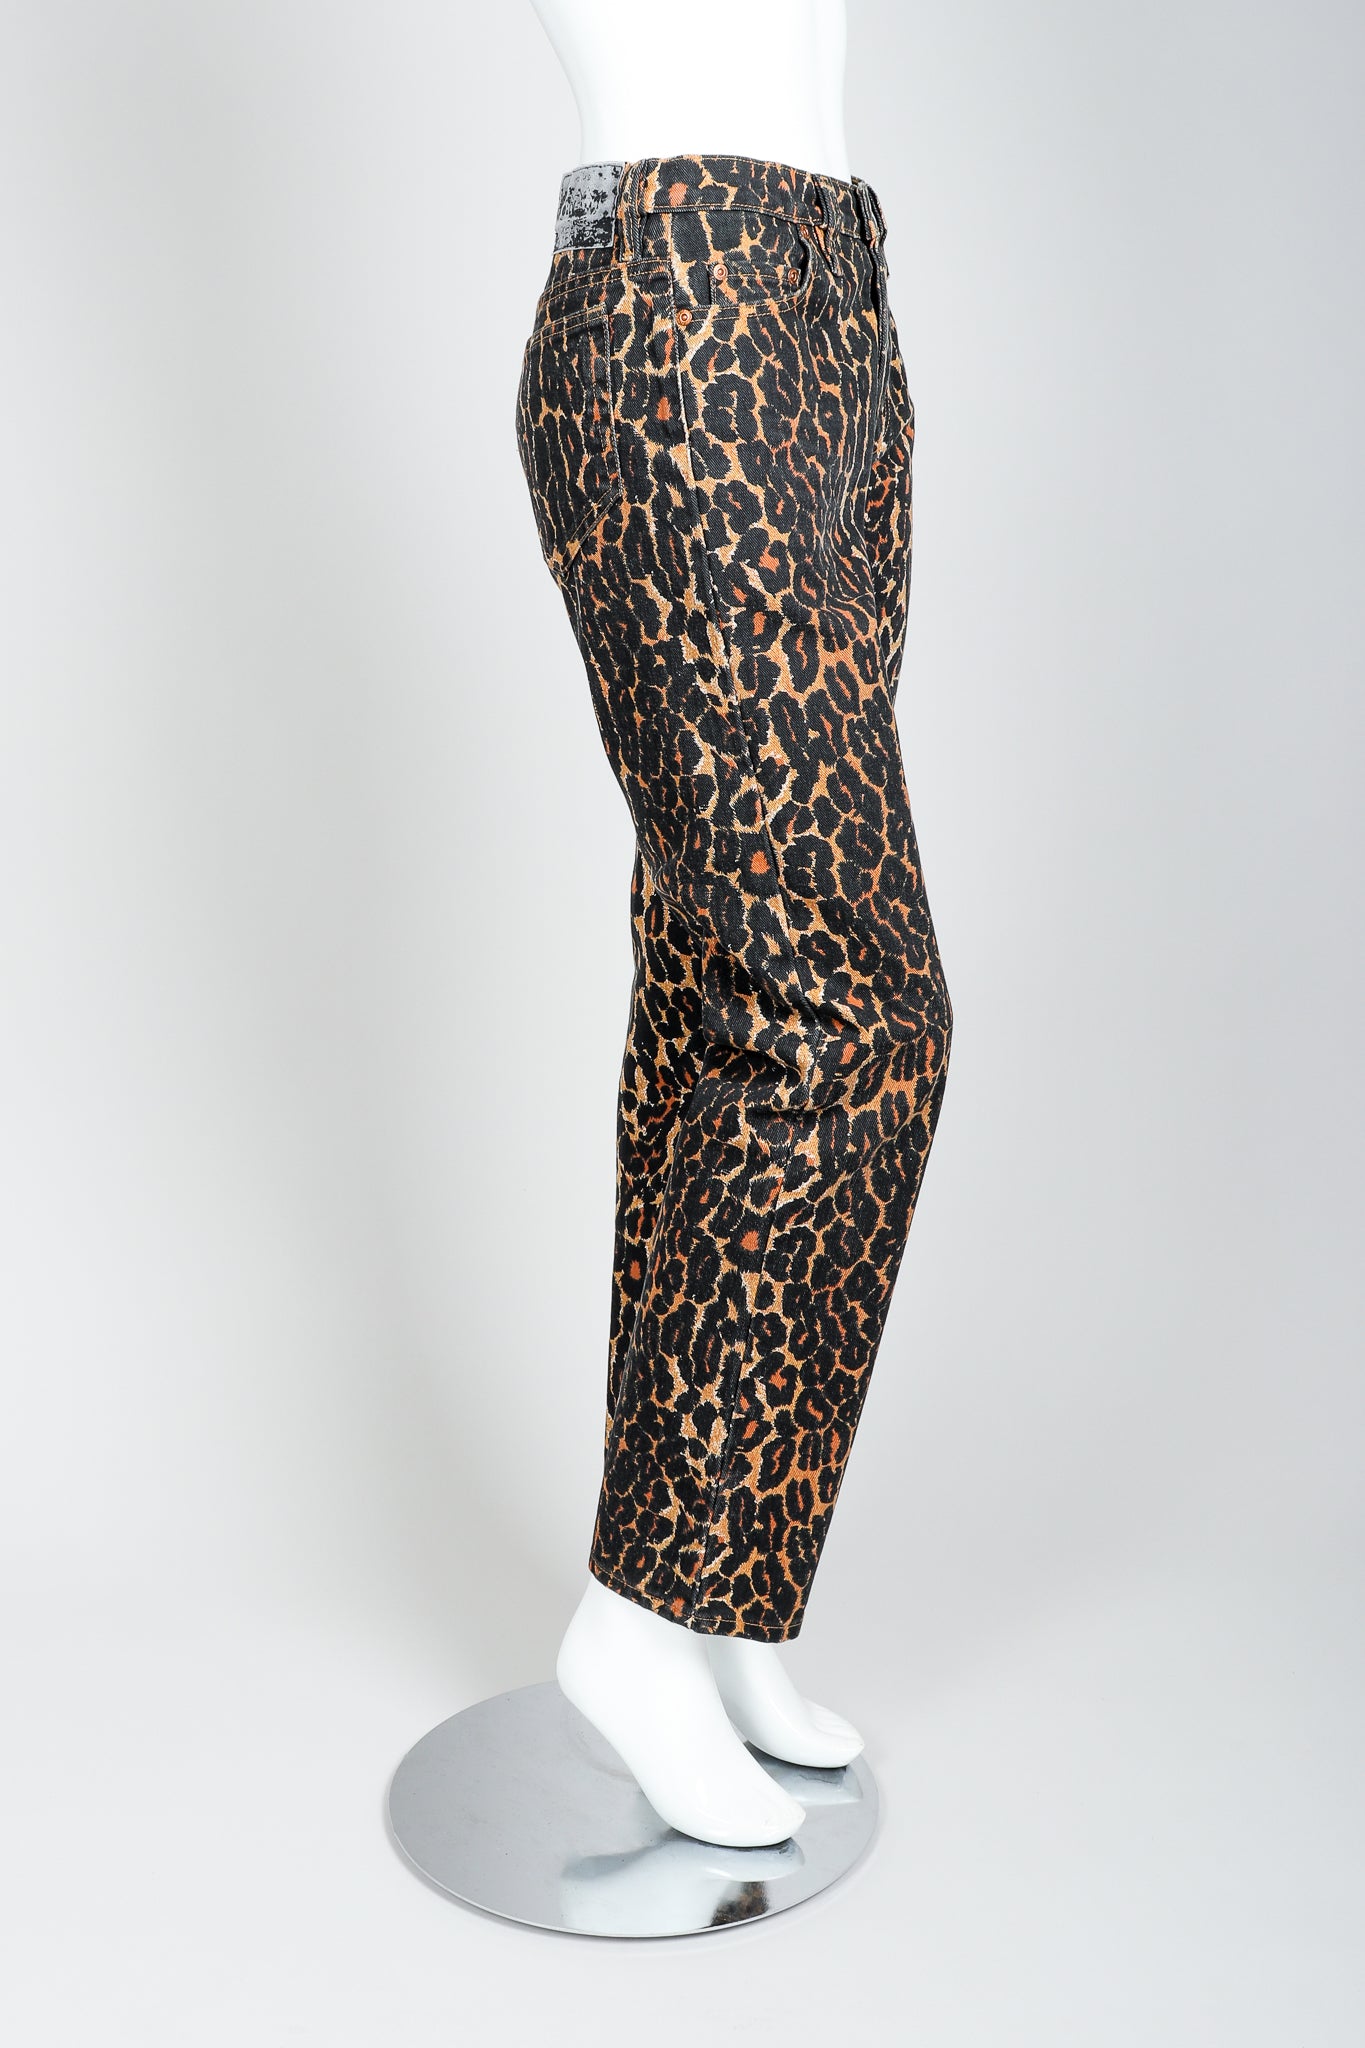 Recess Vintage Todd Oldham Leopard Print Jean On Mannequin, side view